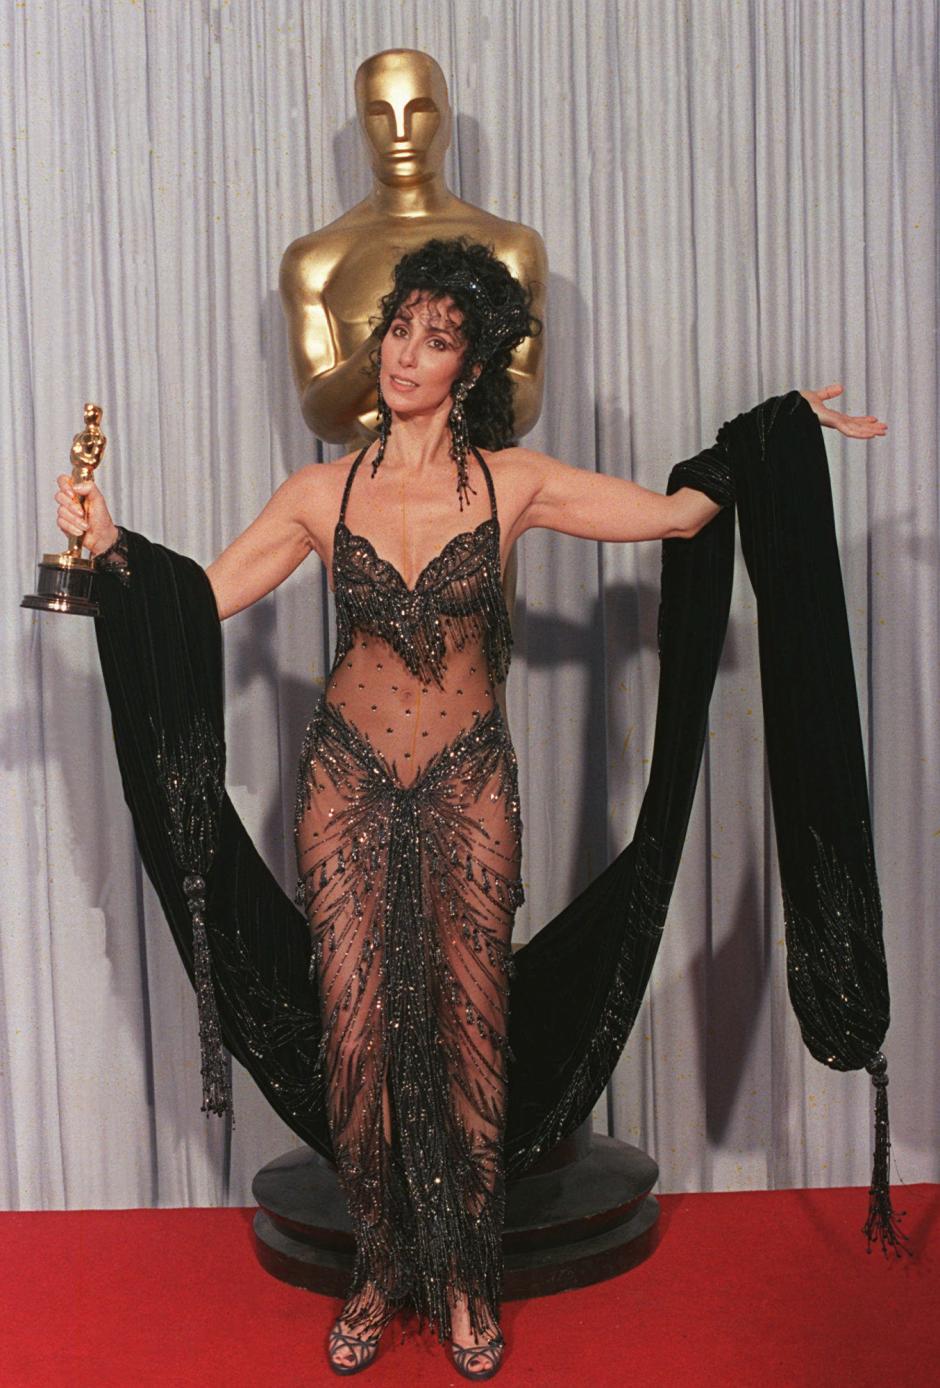 FOR USE WITH FEATURE PACKAGE FOR FRIDAY, MARCH 21--FILE--Cher shows off her Oscar for best actress and her Bob Mackie black sequined see-through gown after winning the award for her role in "Moonstruck" at the Academy Awards April 12, 1988, in Los Angeles. Cher is among the famous and not-so-famous who have used the Oscars ceremony as a forum for both private and political messages. (AP Photo/Files)© RADIAL PRESS